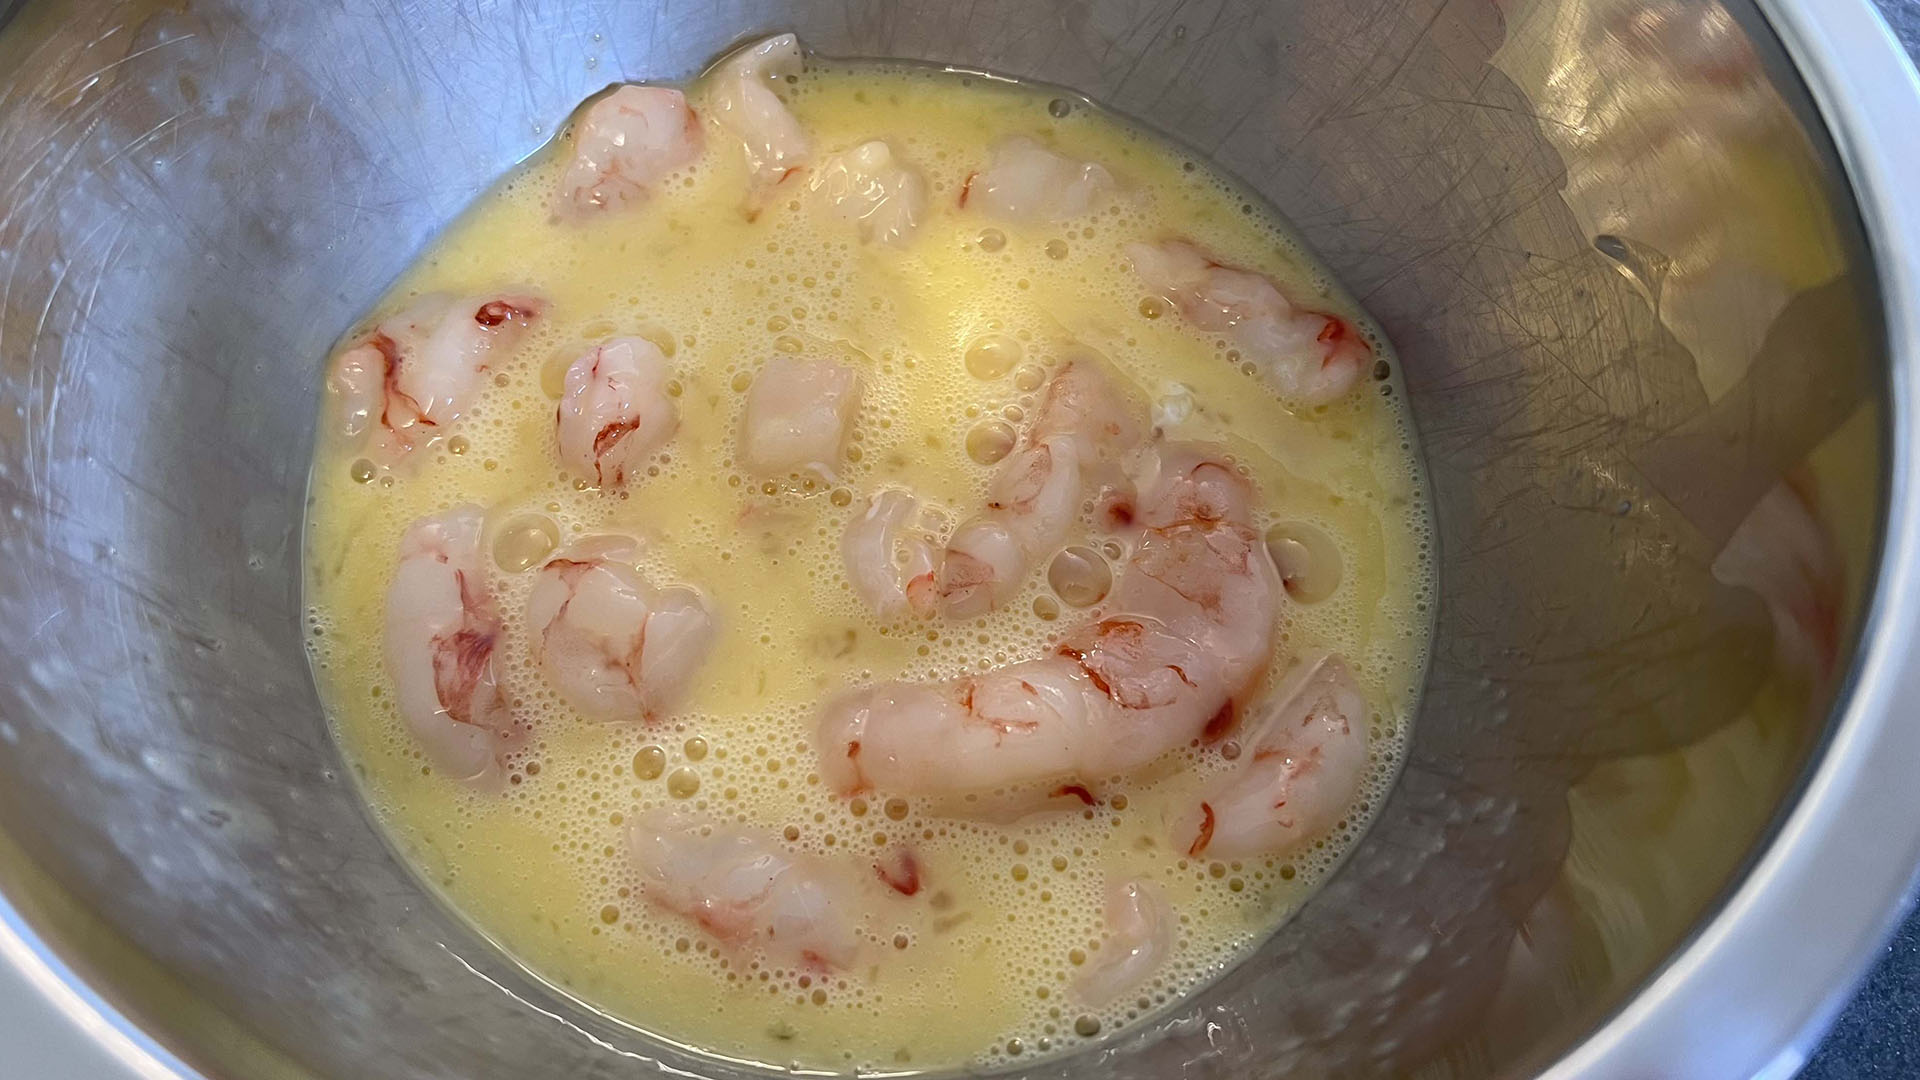 Raw shrimp in a bowl with beaten egg